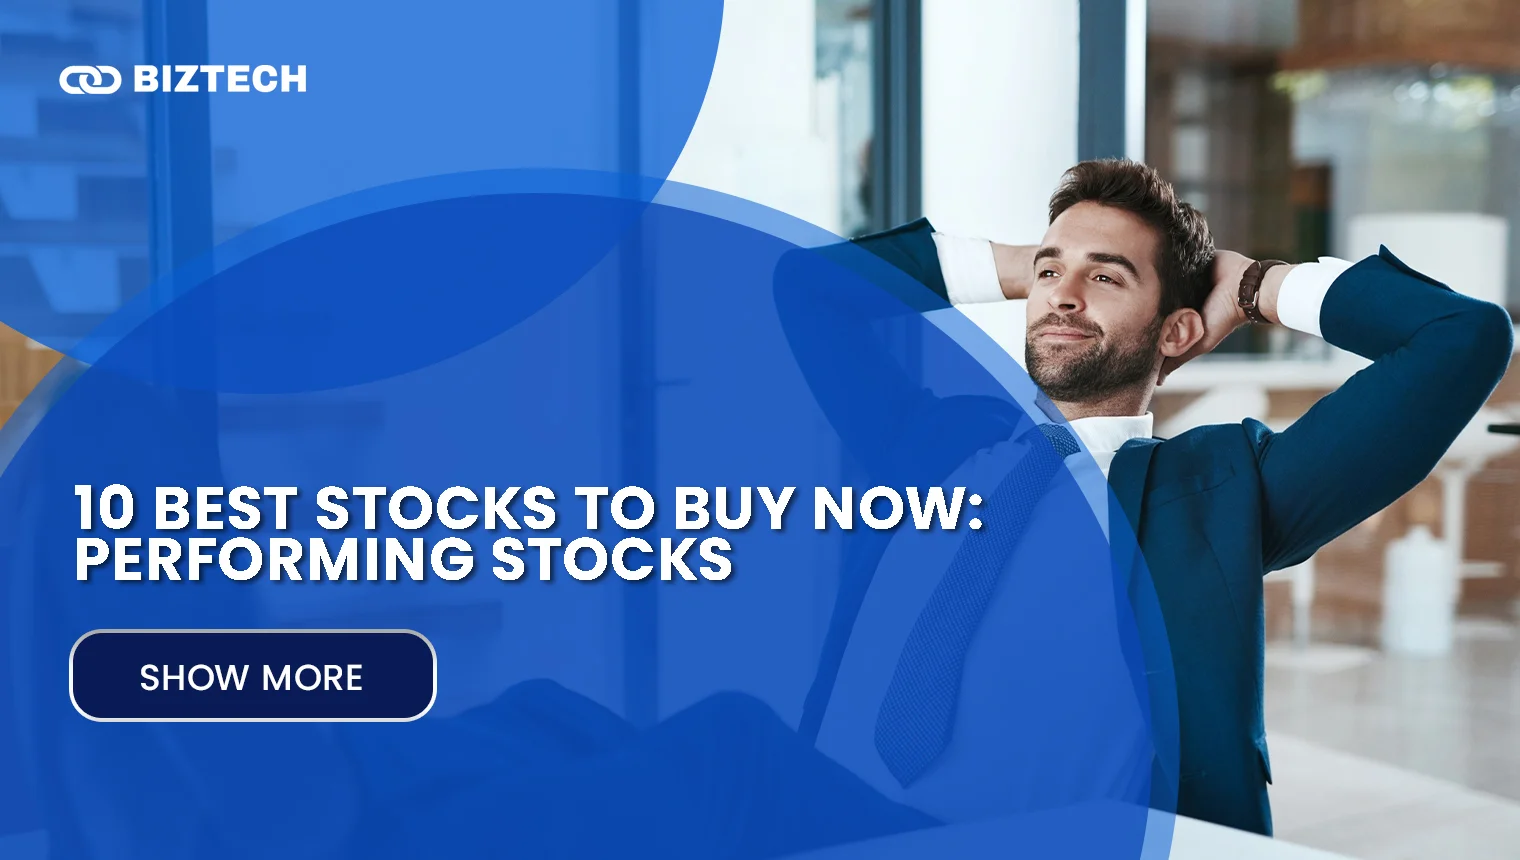 10 Best Stocks to Buy Now: Performing Stocks